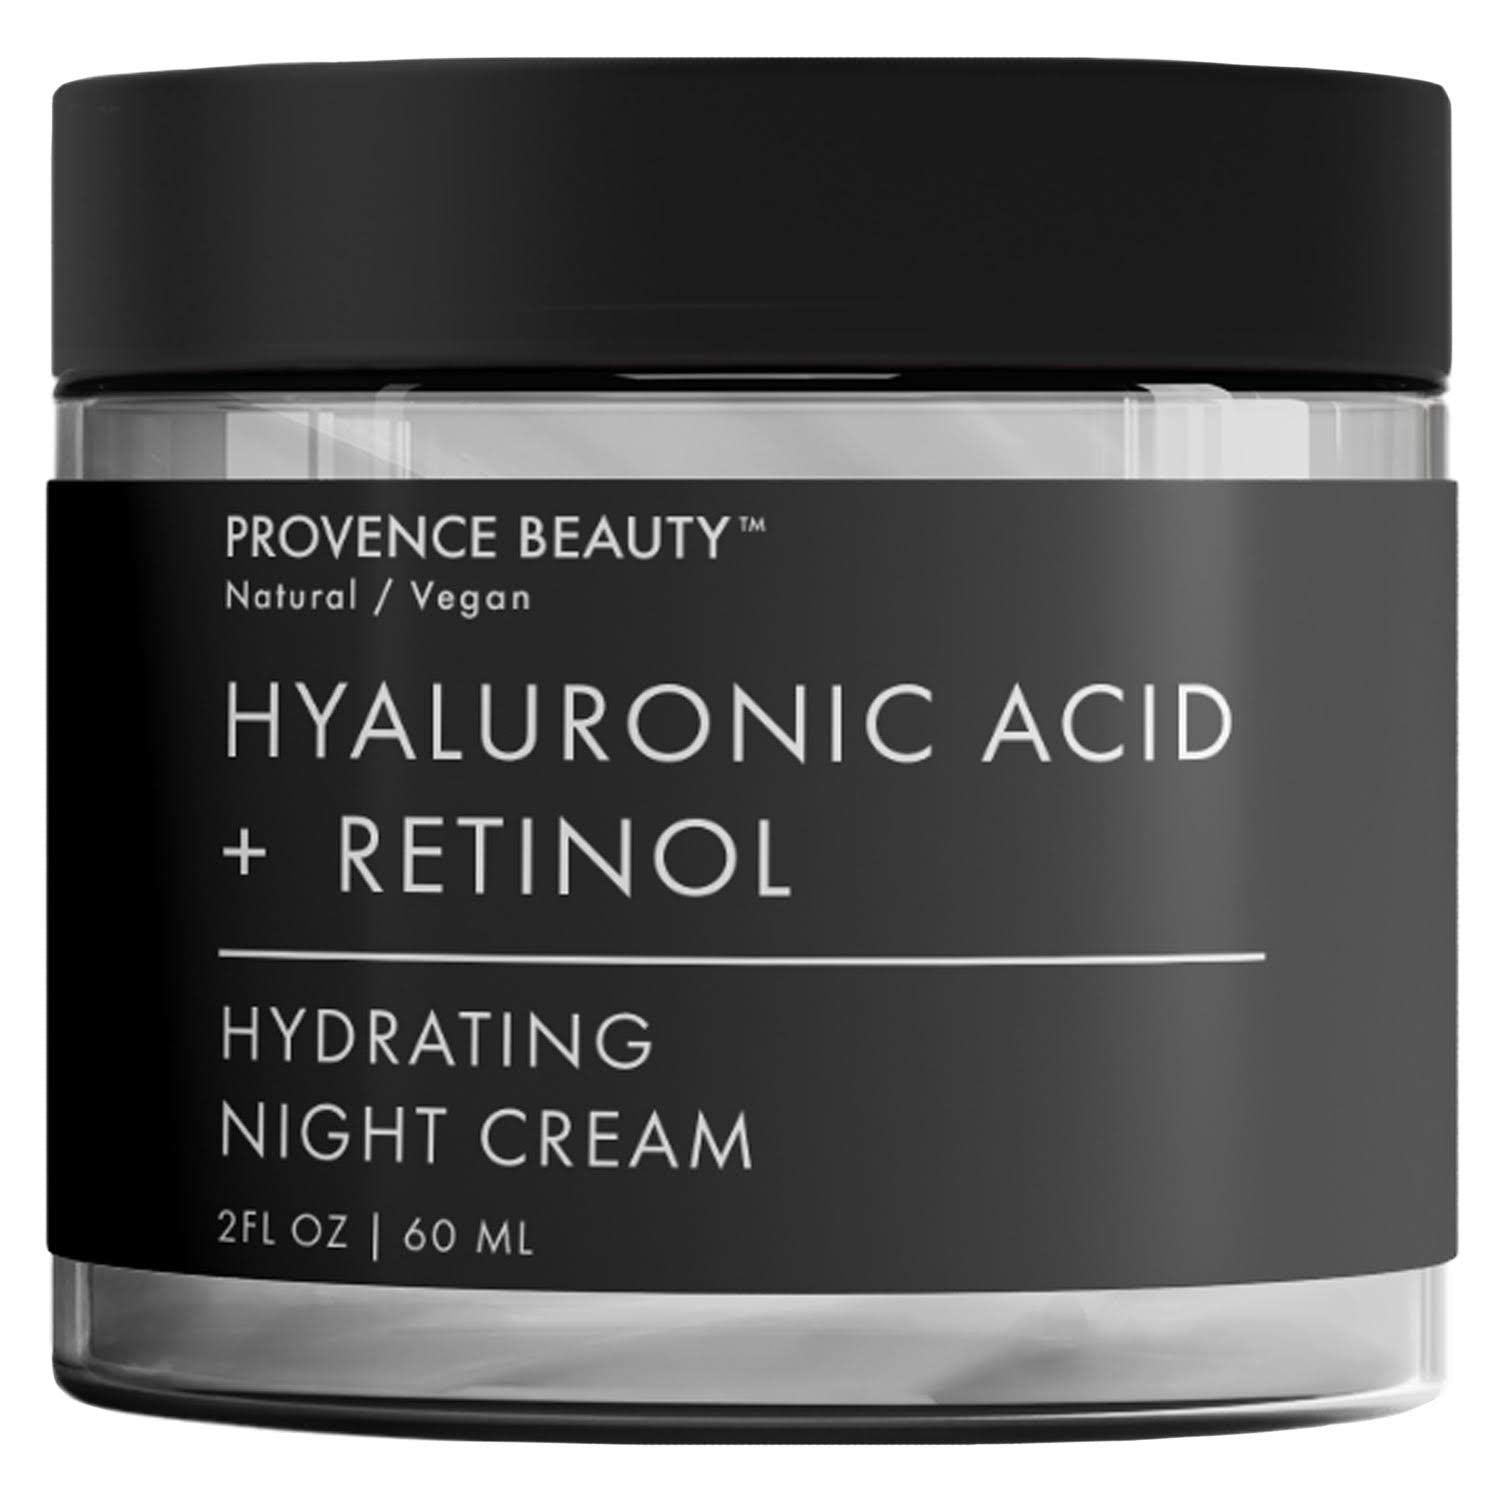 Hyaluronic Acid and Retinol Night Cream - Hydrating Face and Neck Moisturizer for Anti Aging, Wrinkle, Acne, Firming and Dry Skin - Organic Facial Cream for Women, Men and all Skin Types - 2